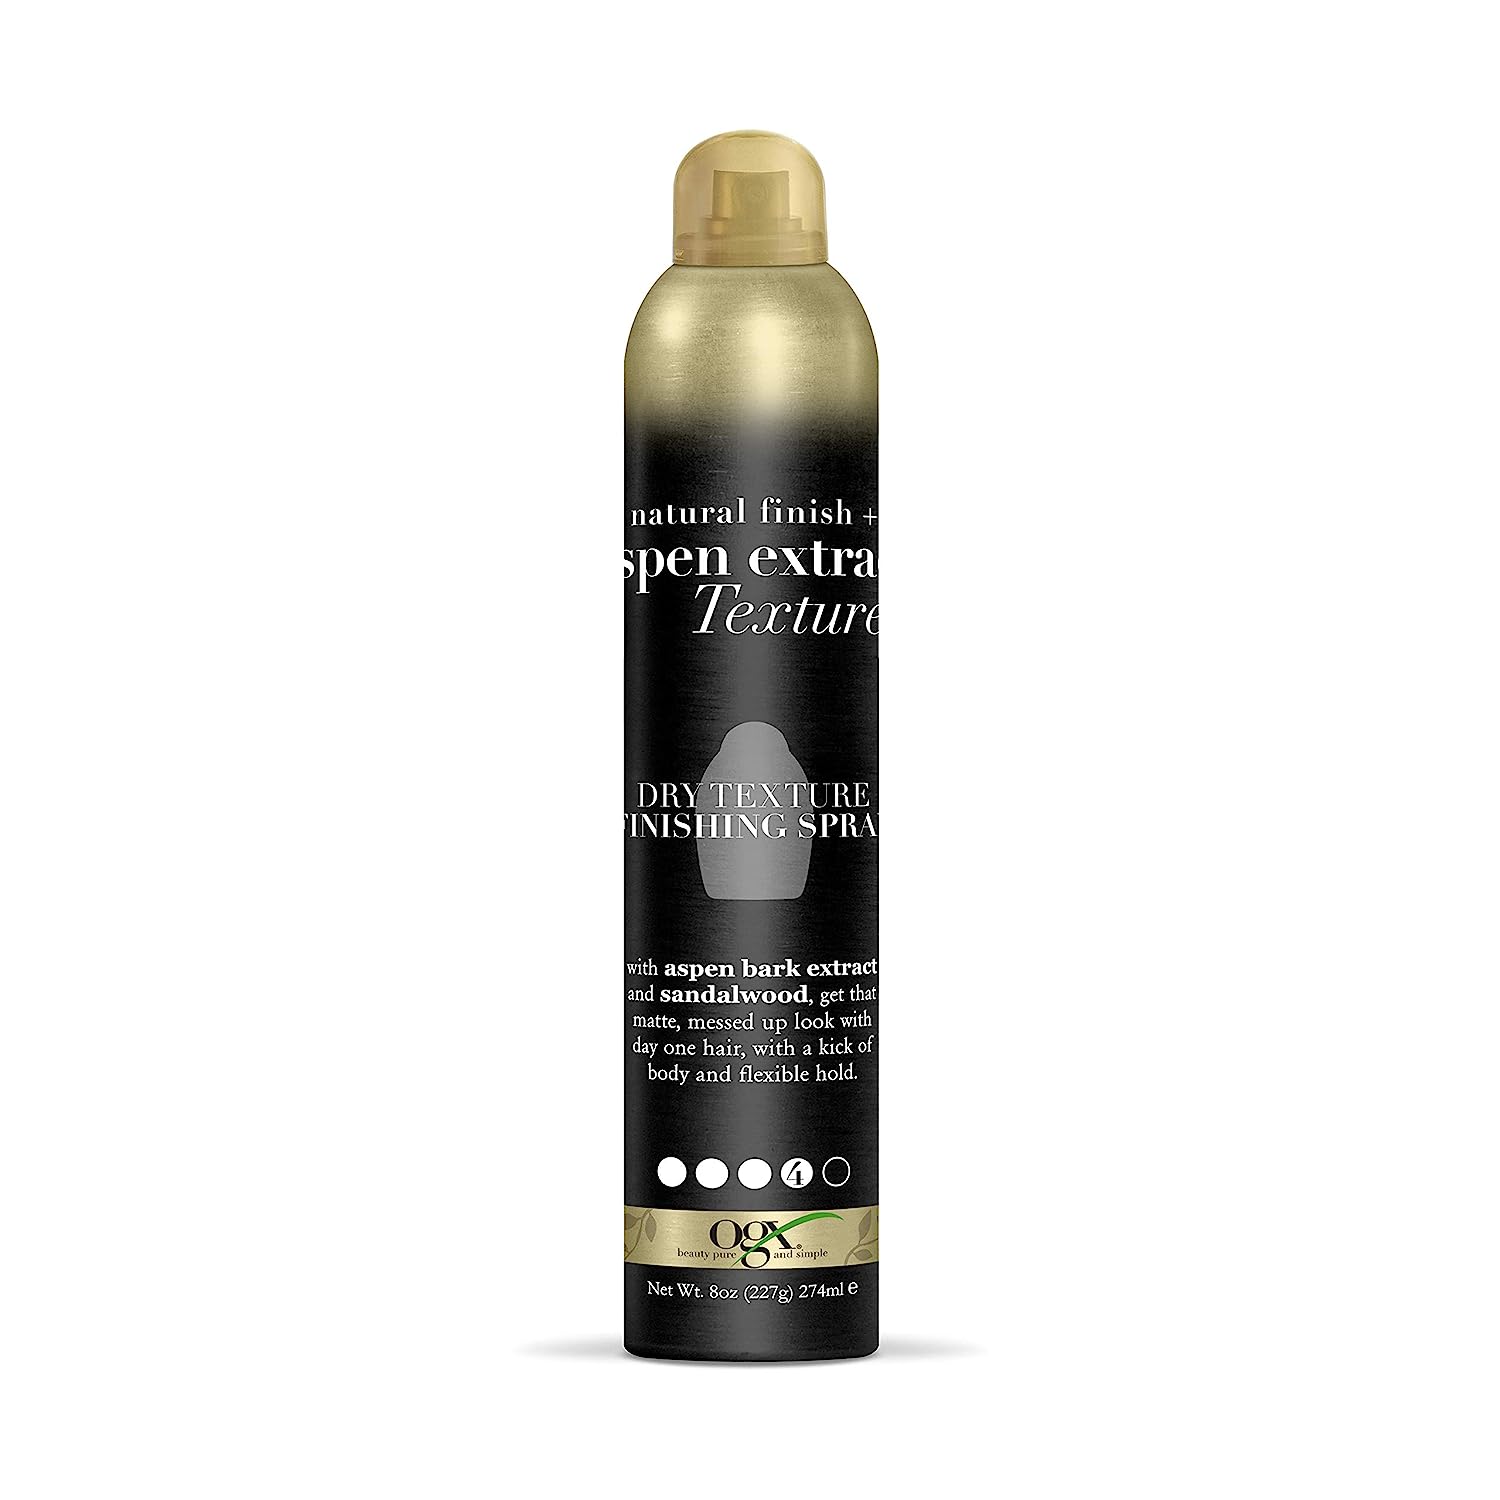 OGX Natural Finish Aspen Extract Dry Texture Hair [...]